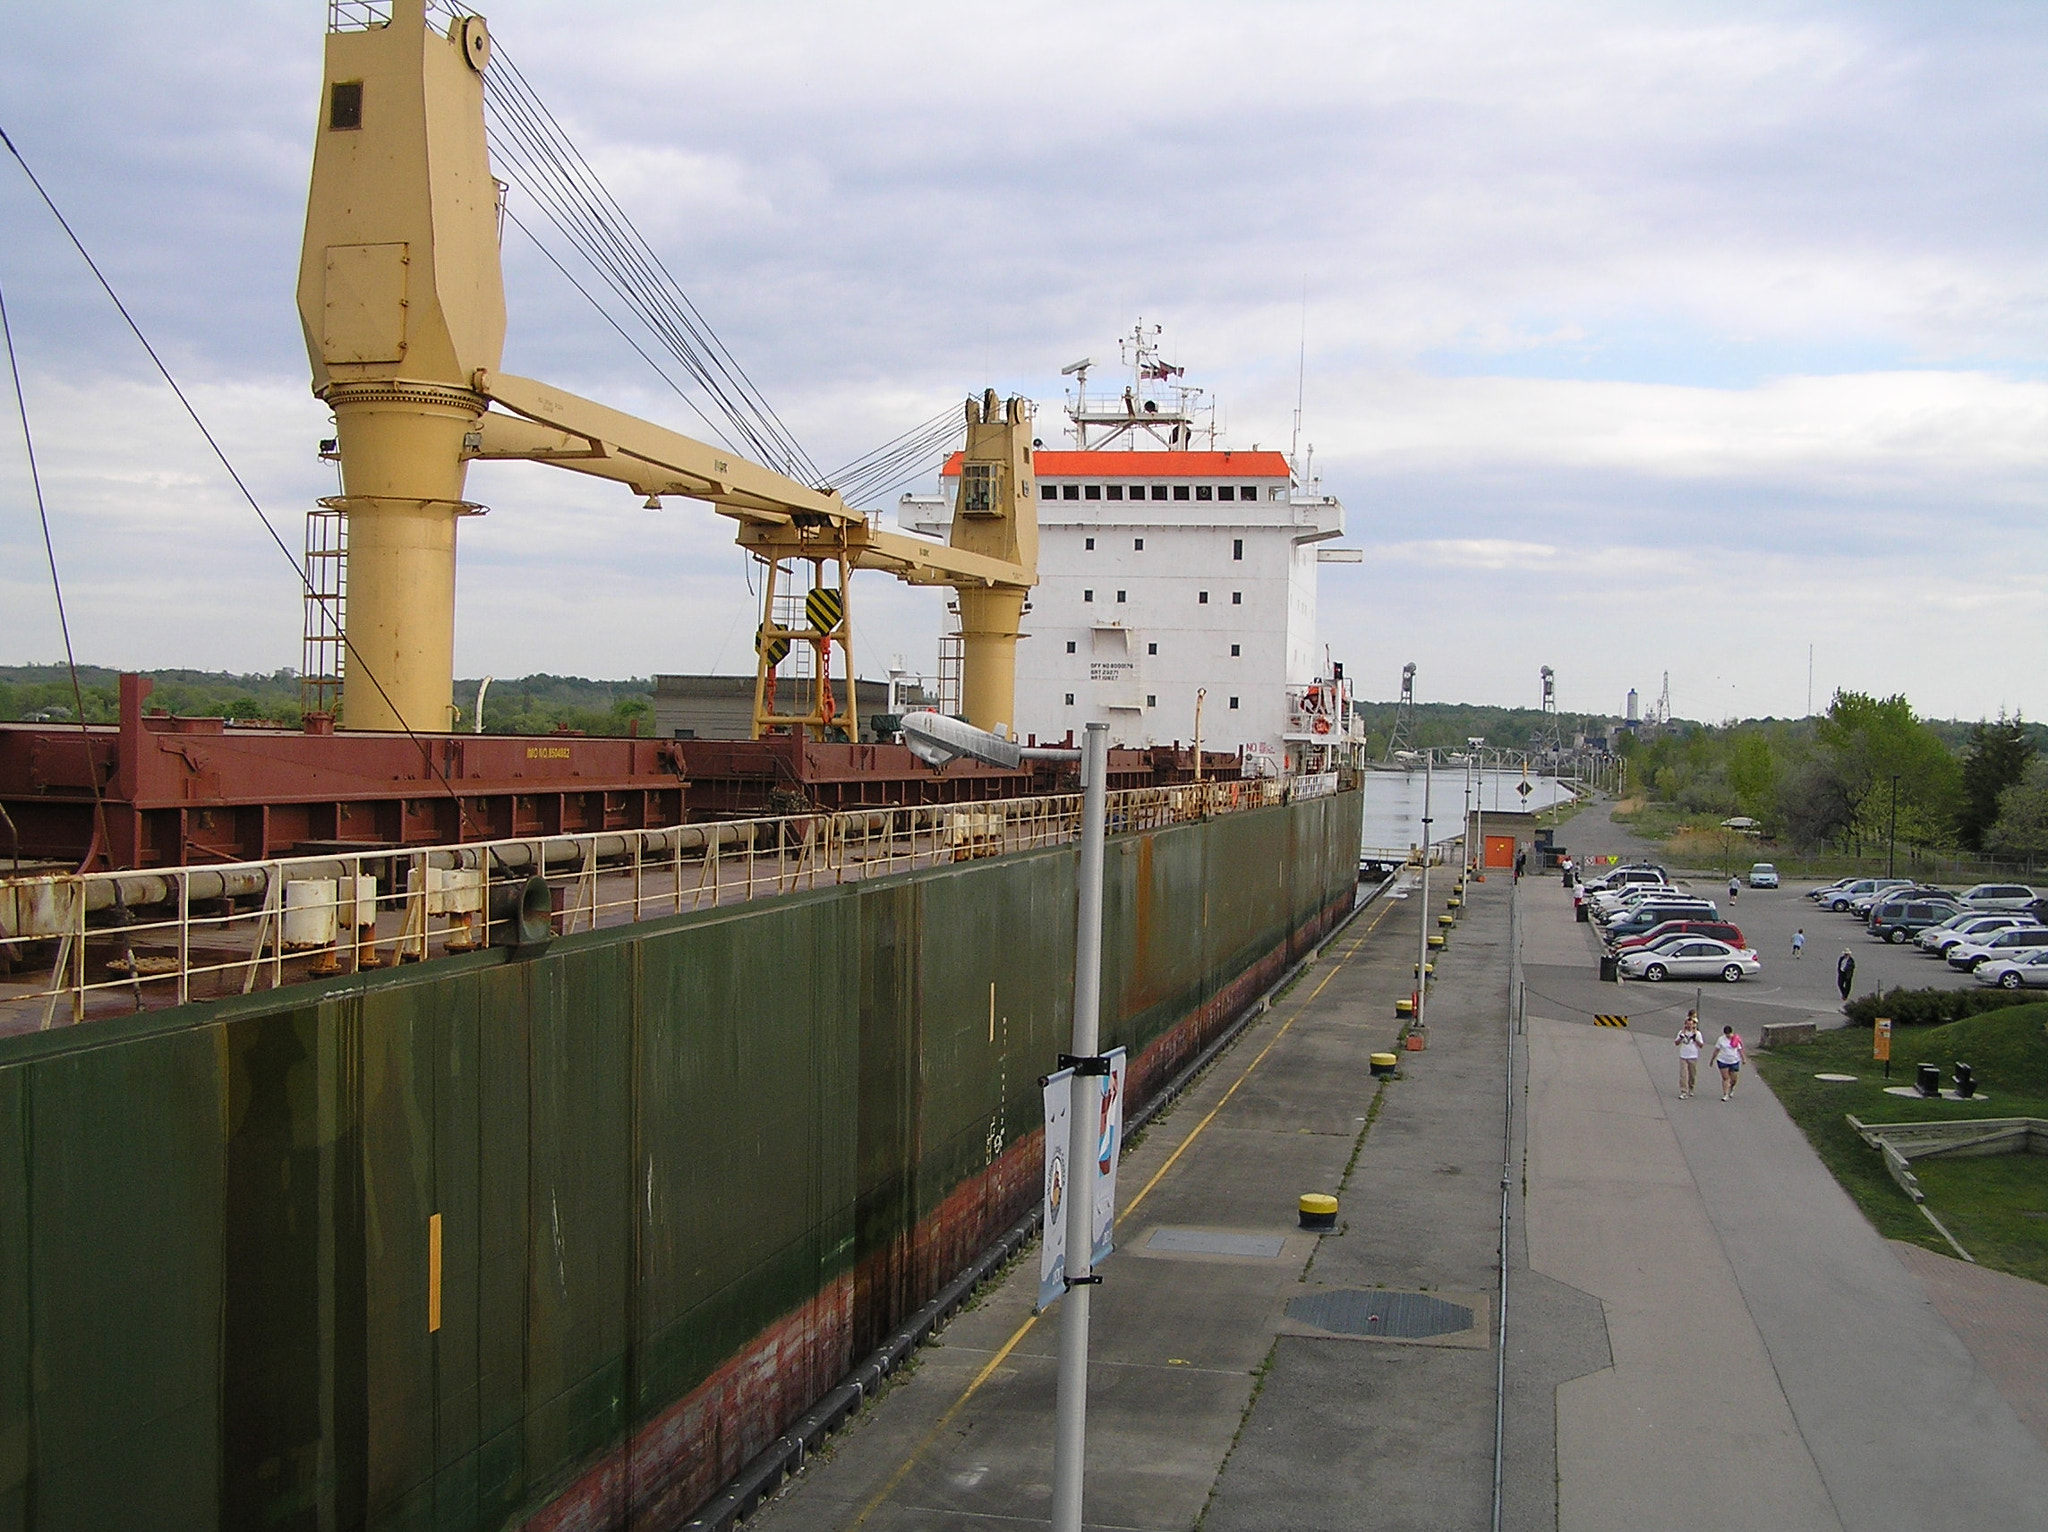 Olympus C770UZ sample photo. Ship at welland canal visitor centre photography